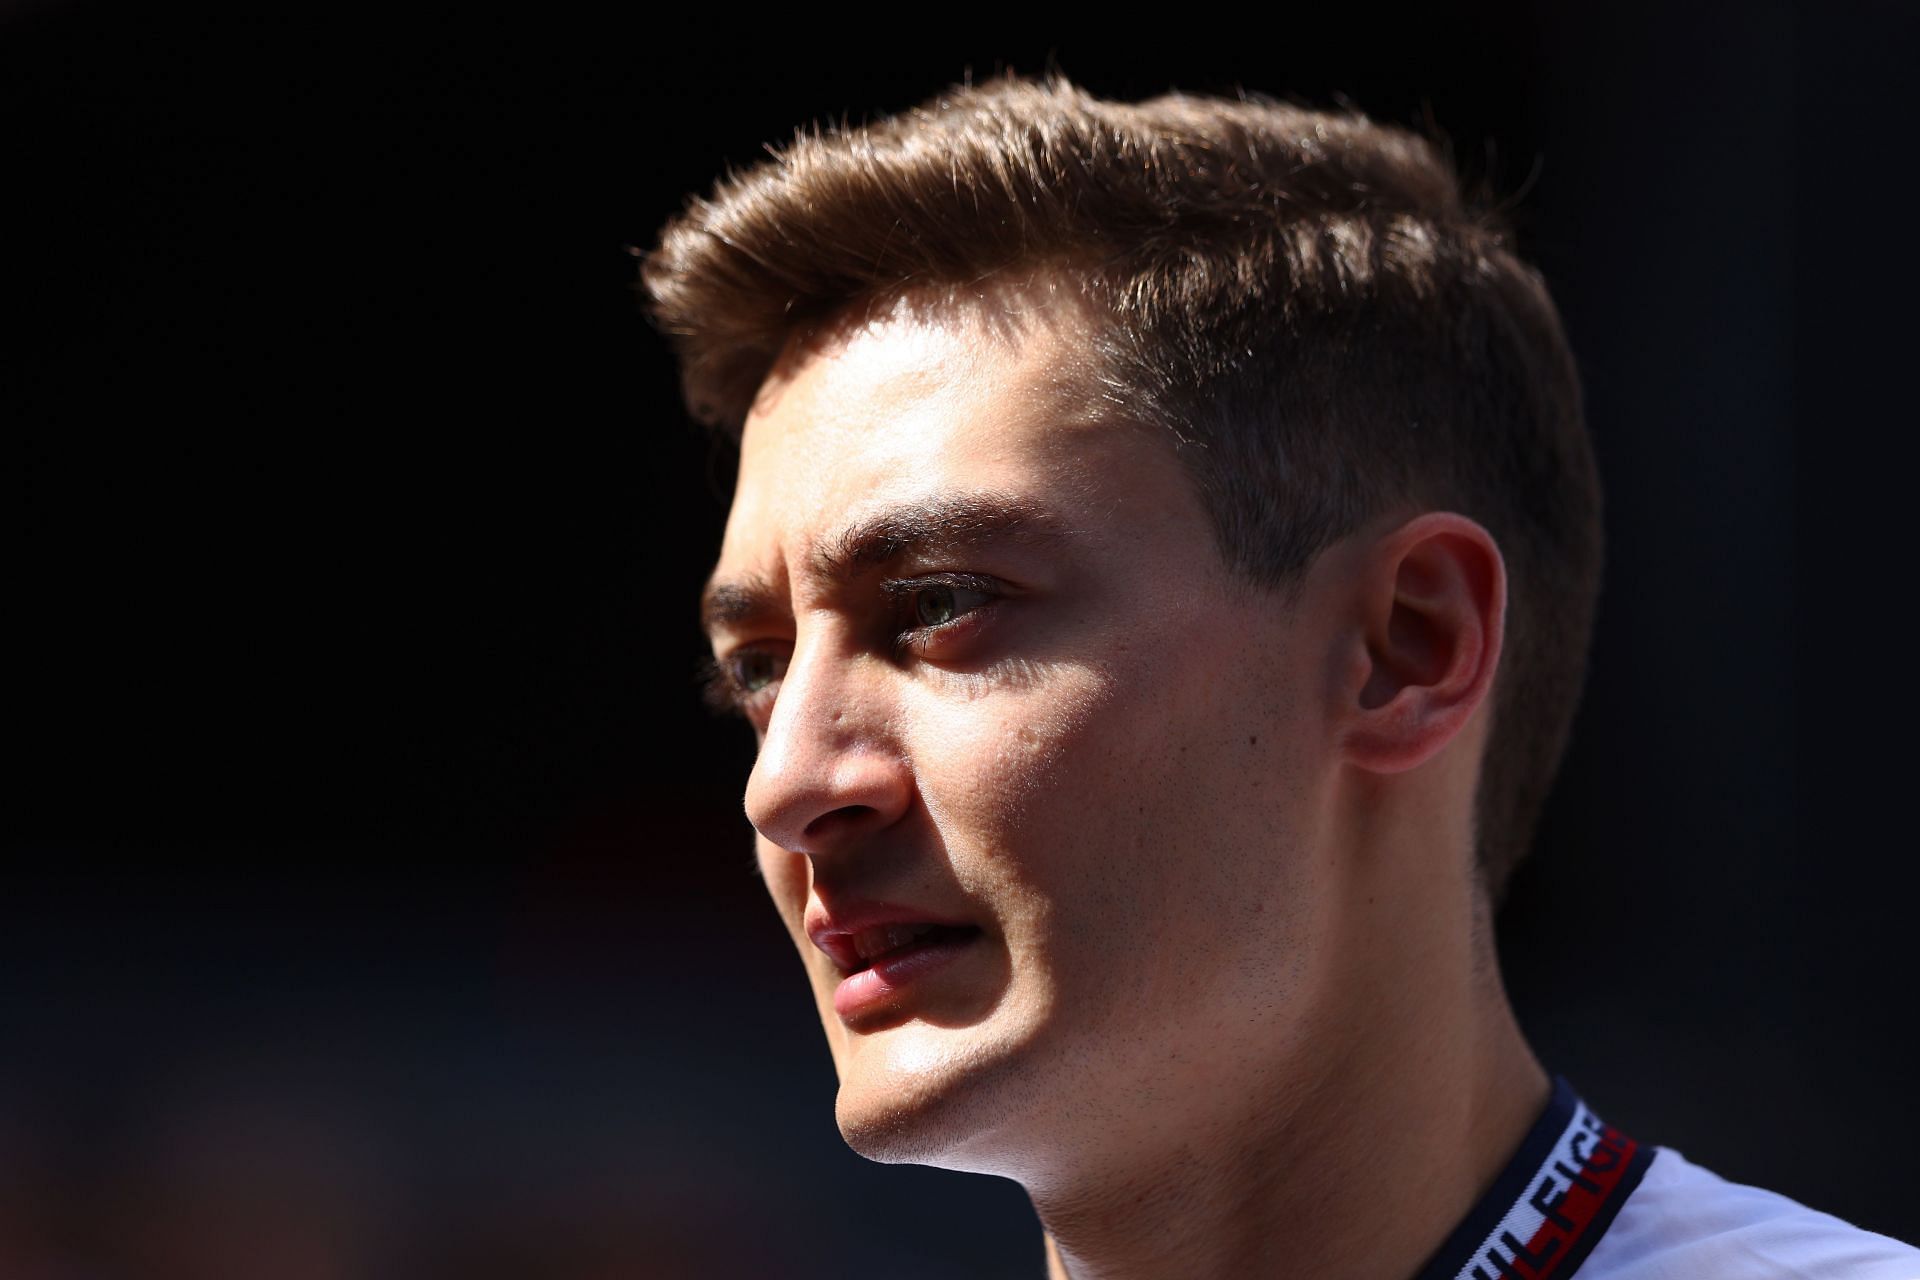 George Russell looks on in the Paddock prior to practice ahead of the 2022 Monaco GP. (Photo by Clive Rose/Getty Images)